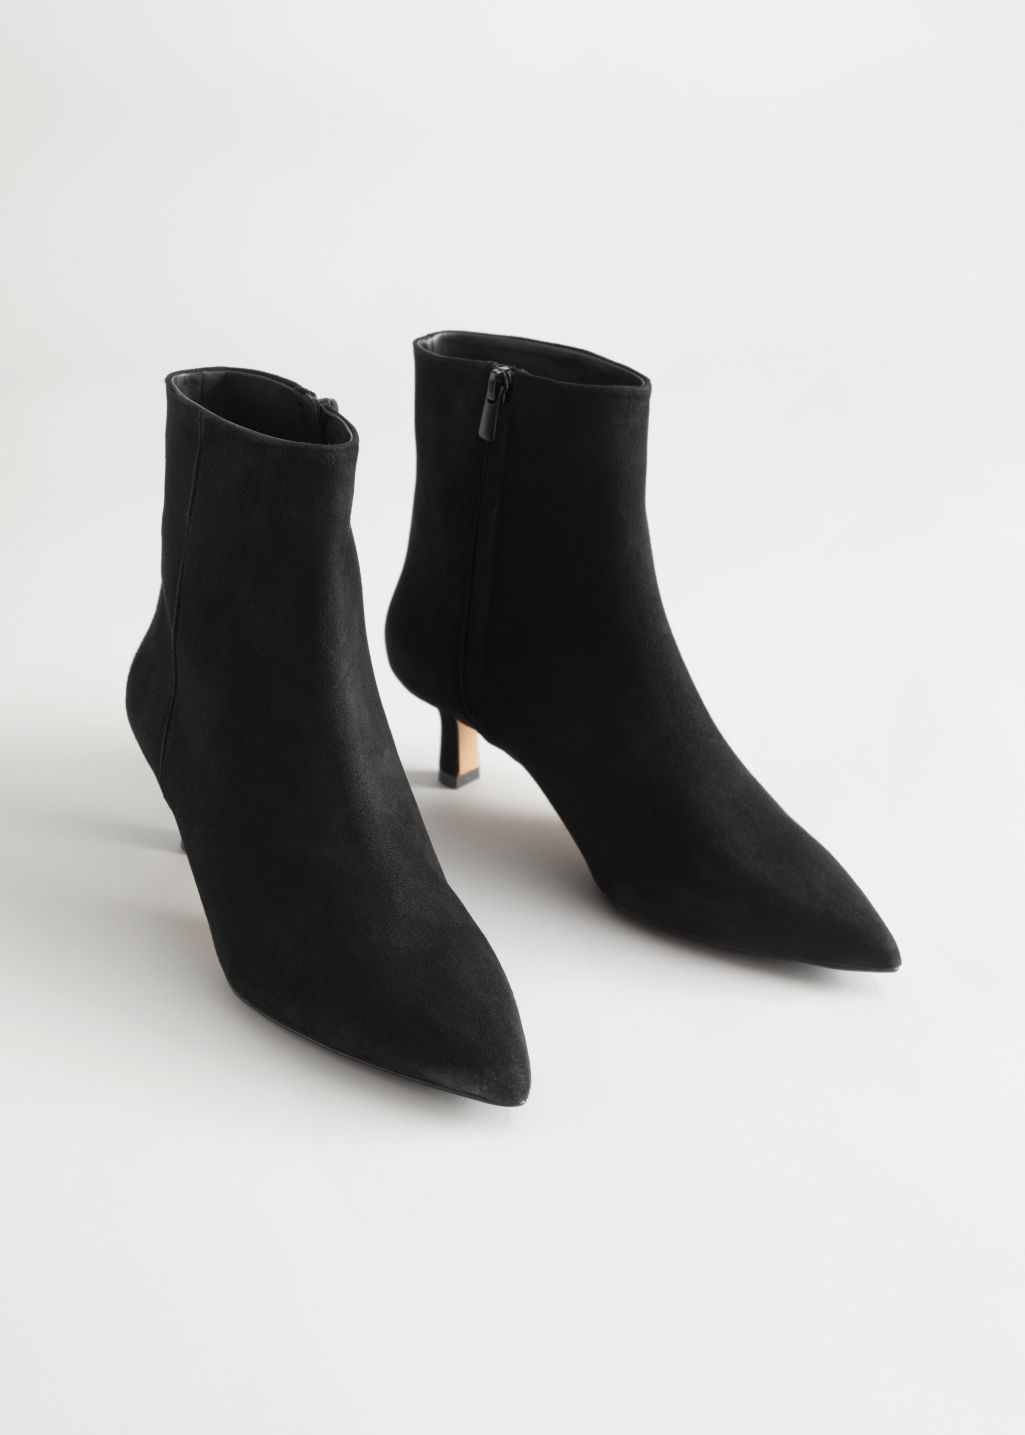 & Other Stories Suede Kitten Heel Ankle Boots